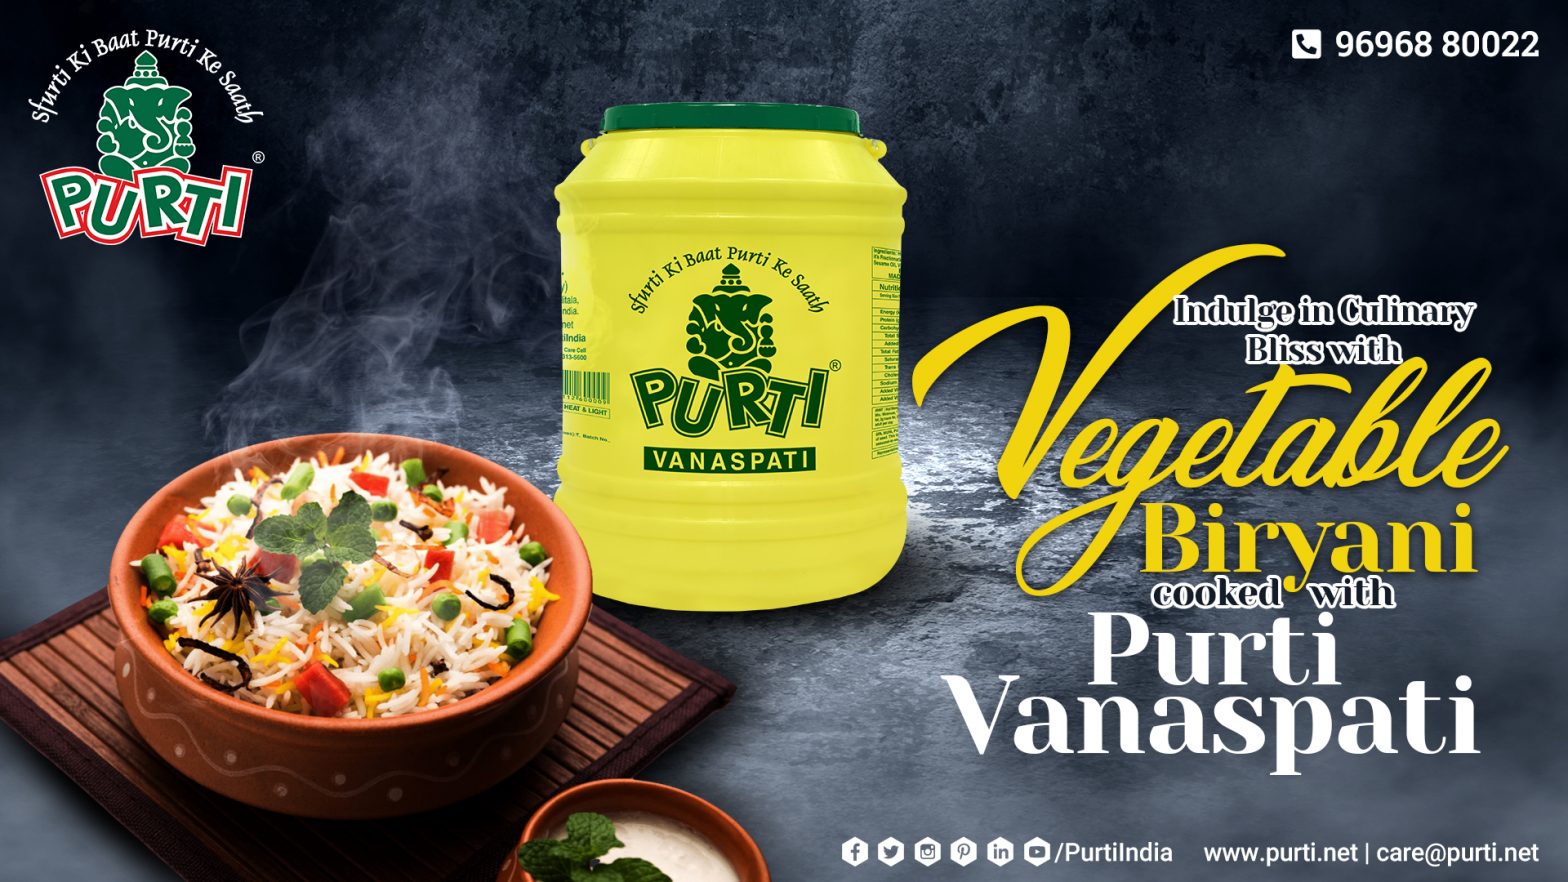 Indulge in Culinary Bliss with Vegetable Biryani cooked with Purti Vanaspati Oil